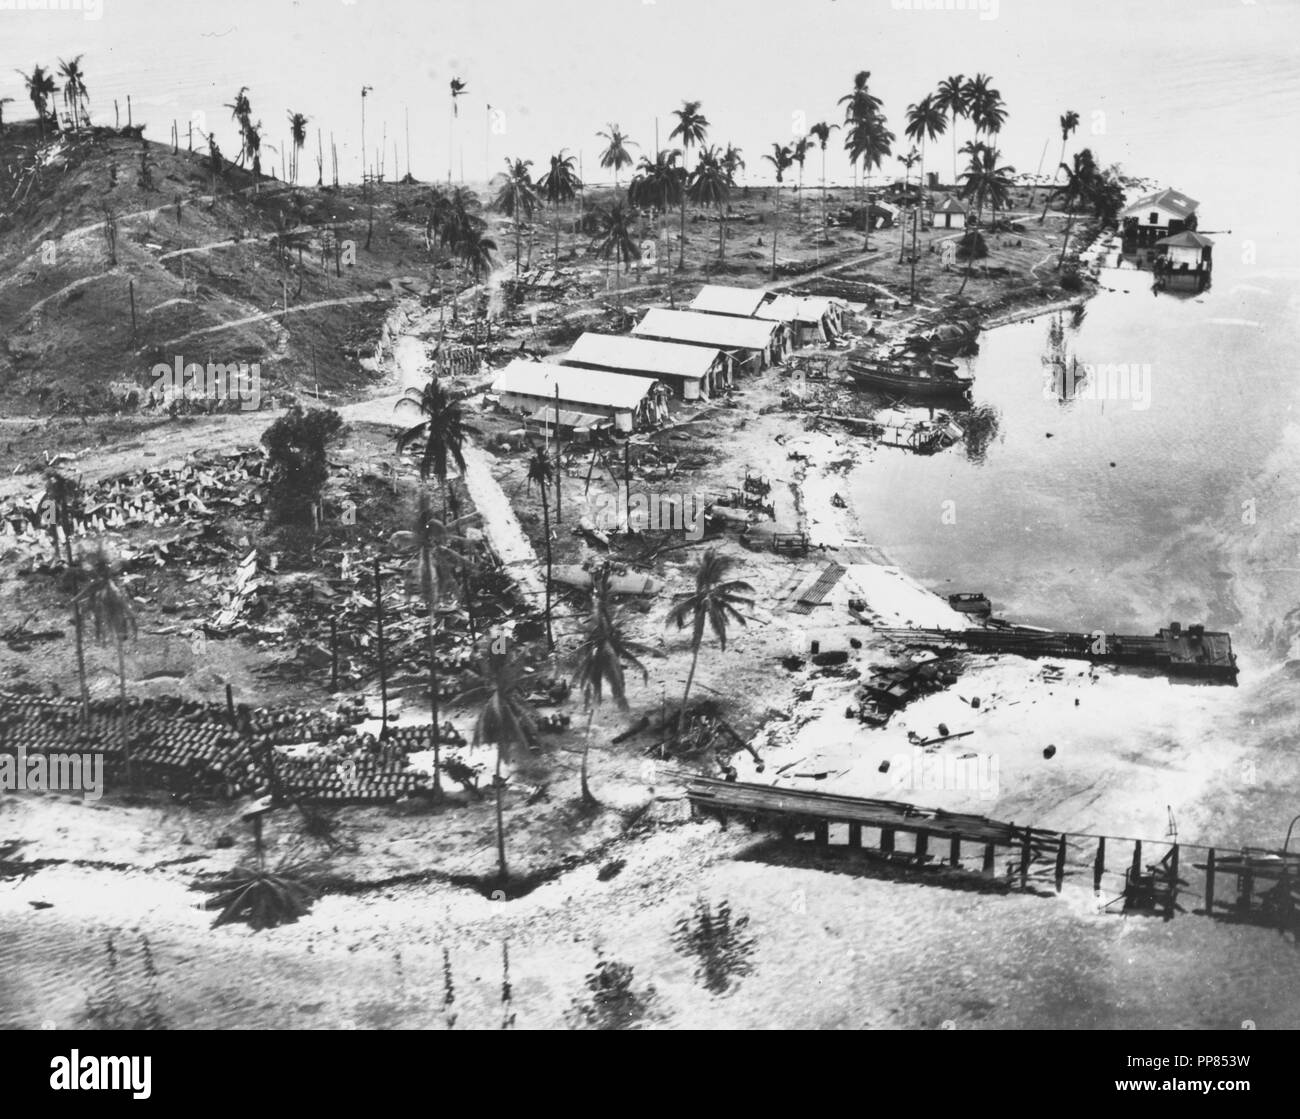 Guadalcanal-Tulagi Landings, 7-9 August 1942.  Wrecked facilities and aircraft at the Japanese seaplane base on Tanambogo Island, east of Tulagi. Photo is dated 8 August 1942 and was probably taken shortly before U.S. Marines captured the island. This view looks about west, with a burned-out pier in the foreground, fuel drums piled to the left and the wreckage of a seaplane among the trees in the center. The buildings are probably left over from the island's days as a Royal Australian Air Force facility. Stock Photo